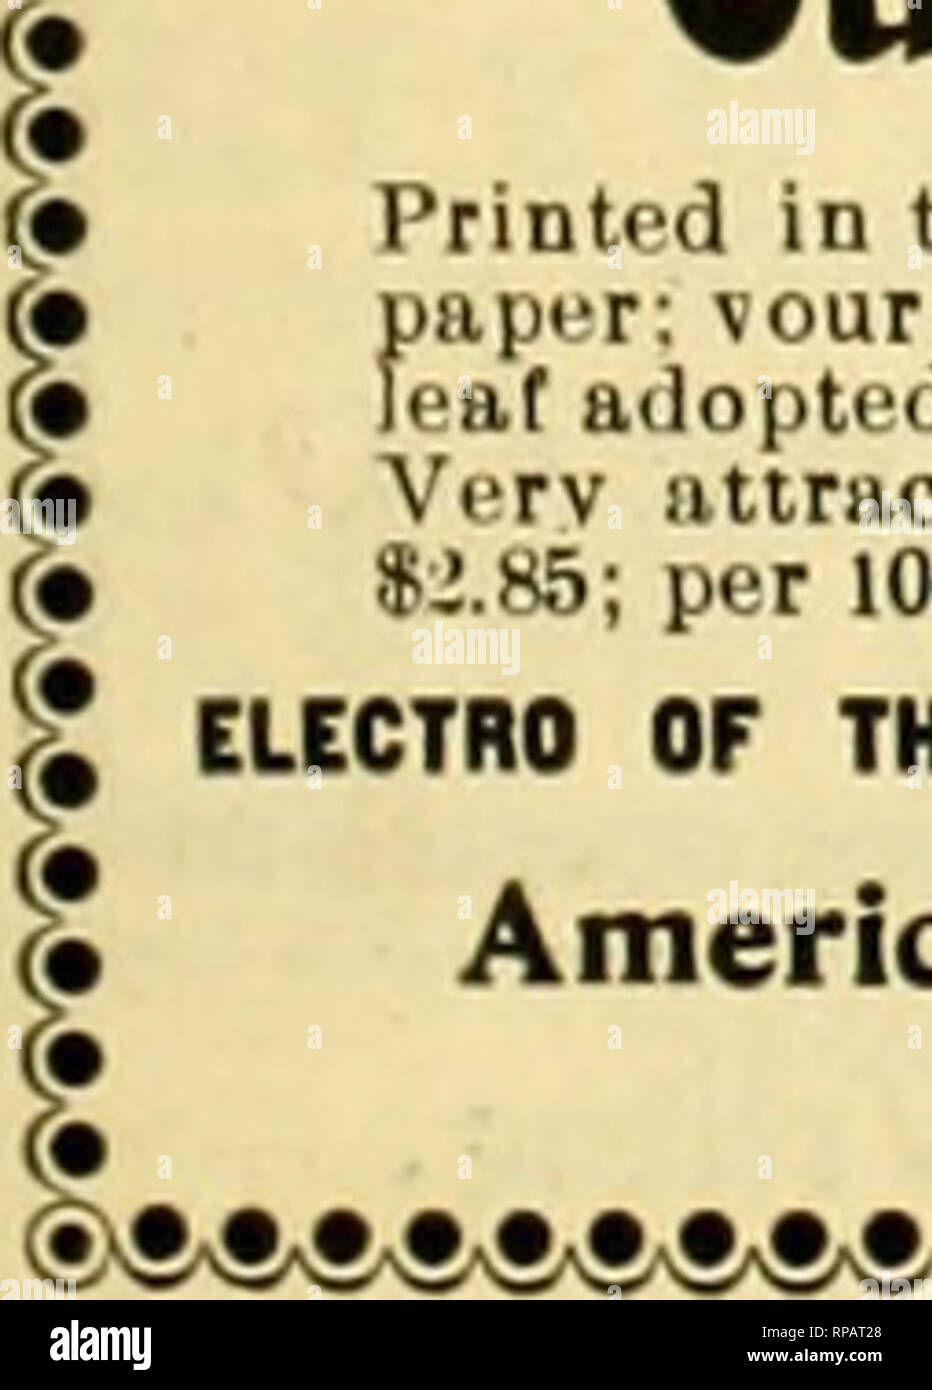 . The American florist : a weekly journal for the trade. Floriculture; Florists. 1905- Th E American Florist. 177 Orchids! i^ CAaiErA MENDElII. just arrived In fine con- dition tt sbipiuent of this scarce and beautiful Orchid. Also Laelia Ancepa and Oncidium Tigrtuum, etc. Write for special list No. 14. Lager &amp; Hurrell, summit, n. j. Orchid Growers and Importers. Please mention the A merican Florist when writing, GARDENIA PLANTS. (GRAMDIFLORA CAPE JESSAMINE.) Our leading specialty. Natural growing con- ditions here ideal; sue tells its own story. ^A^e do not think they can be equaled elsew Stock Photo